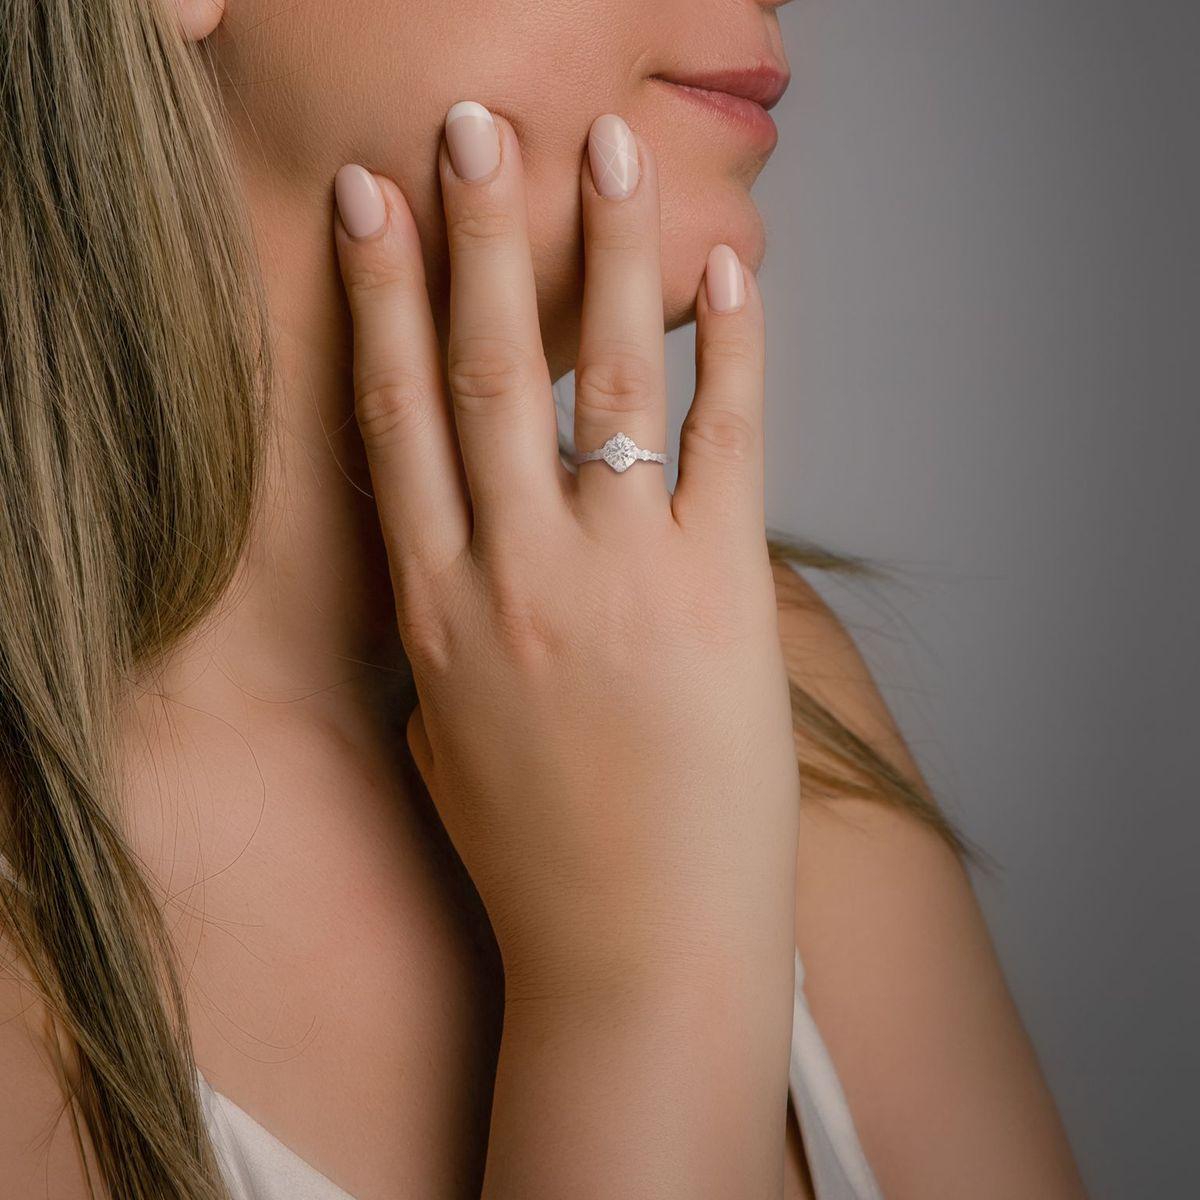 This sophisticated ring, fashioned in 18K white gold, is centered around a dazzling round brilliant natural diamond. The diamond, known for its remarkable sparkle and fire, is graded F in color, indicating a high level of whiteness and brightness.